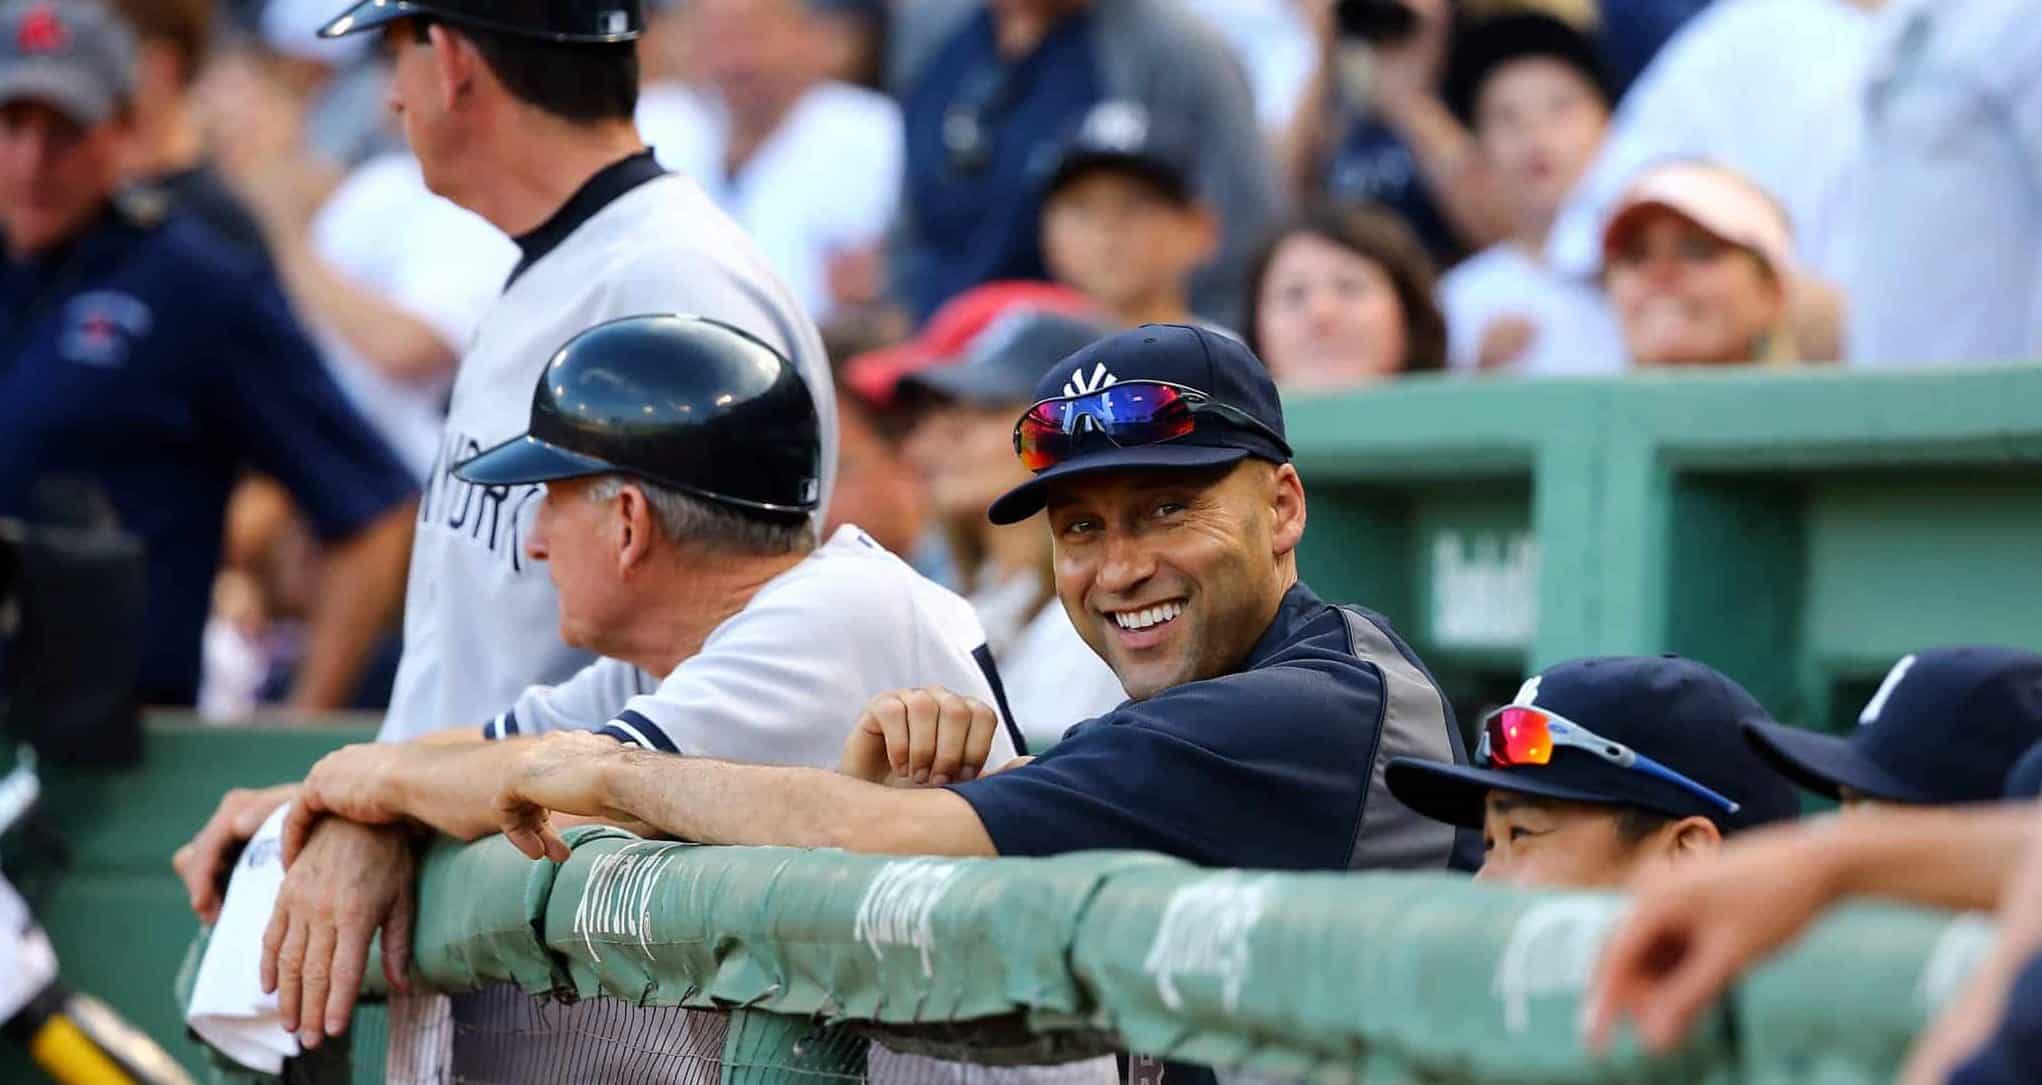 BOSTON, MA - SEPTEMBER 28: Derek Jeter #2 of the New York Yankees looks on from the dugout against the Boston Red Sox during the last game of the season at Fenway Park on September 28, 2014 in Boston, Massachusetts.